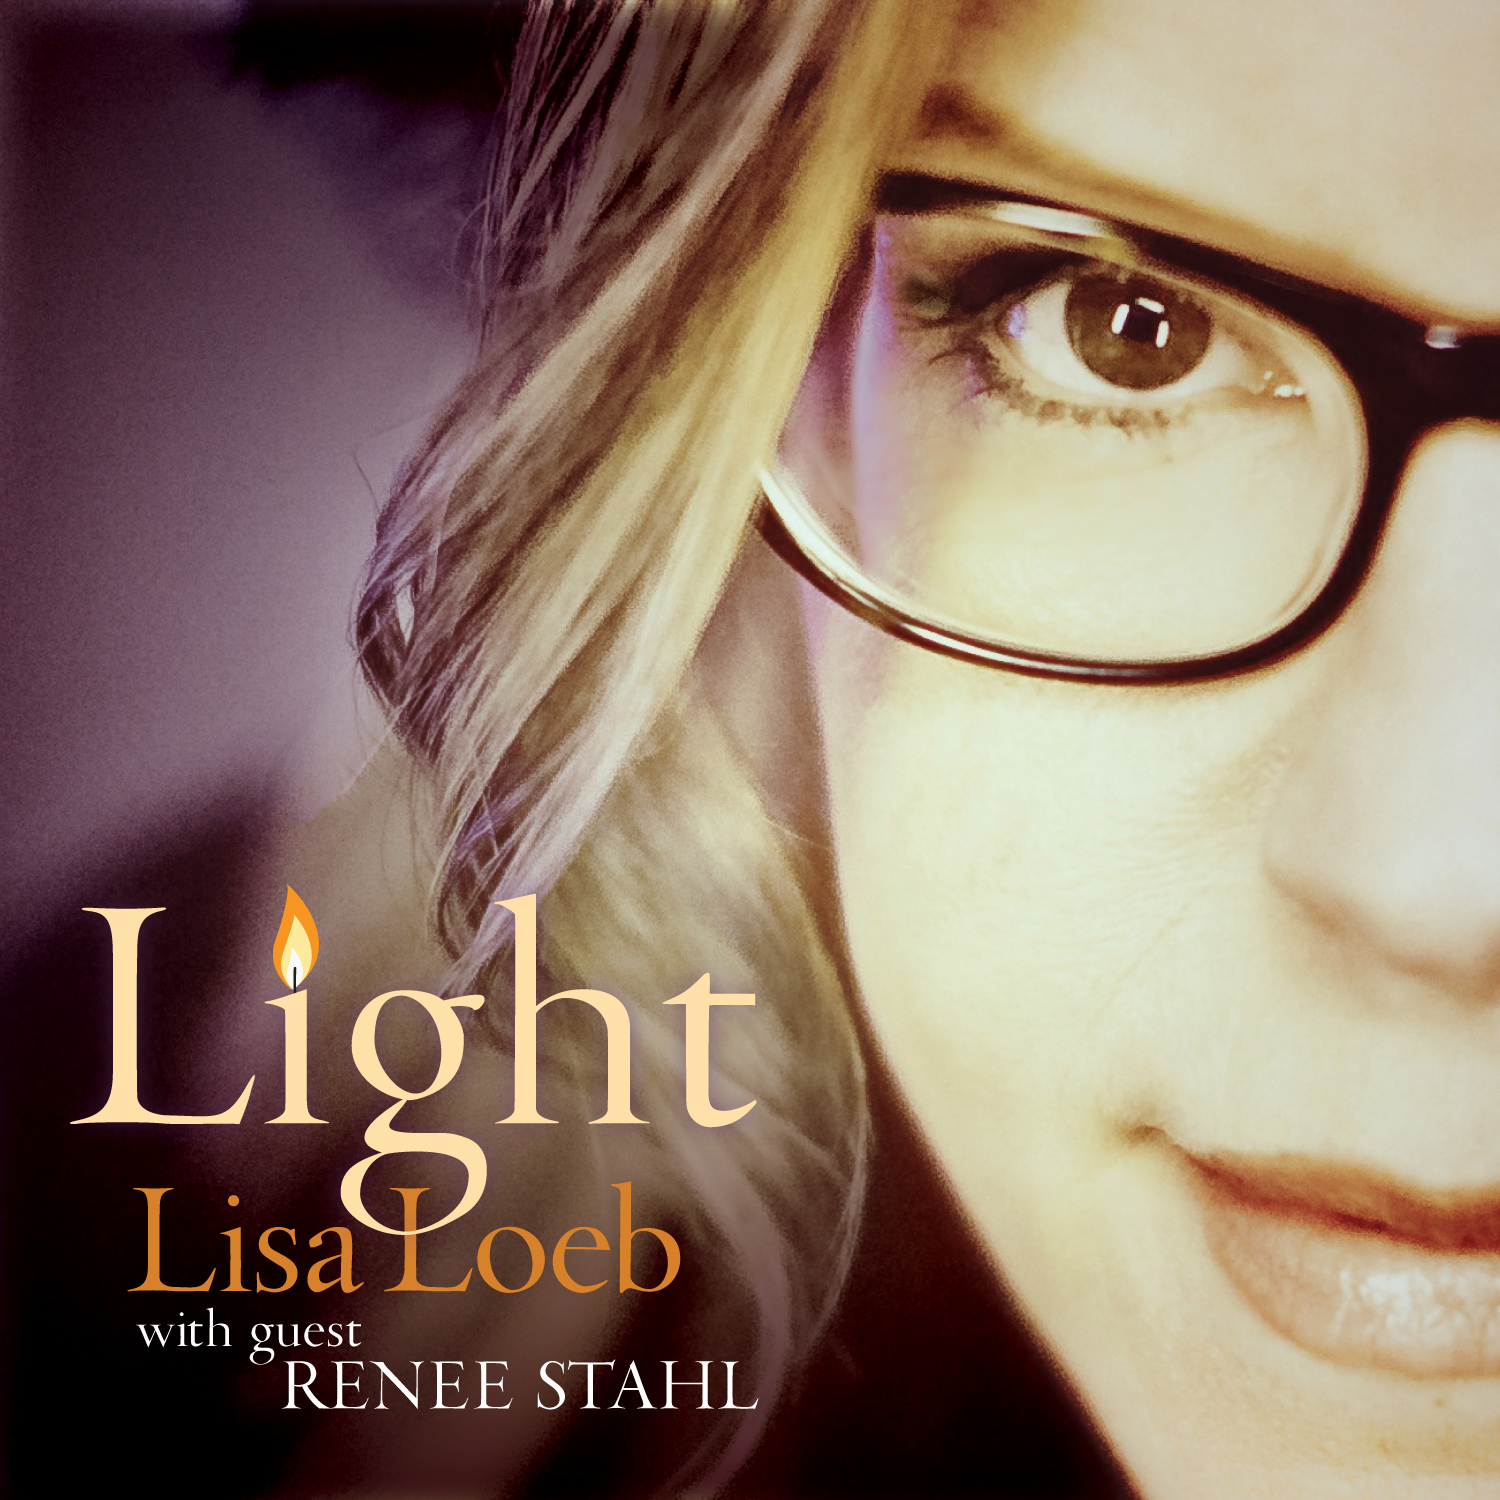 Lisa Loeb releases a new single for the holidays: "Light"